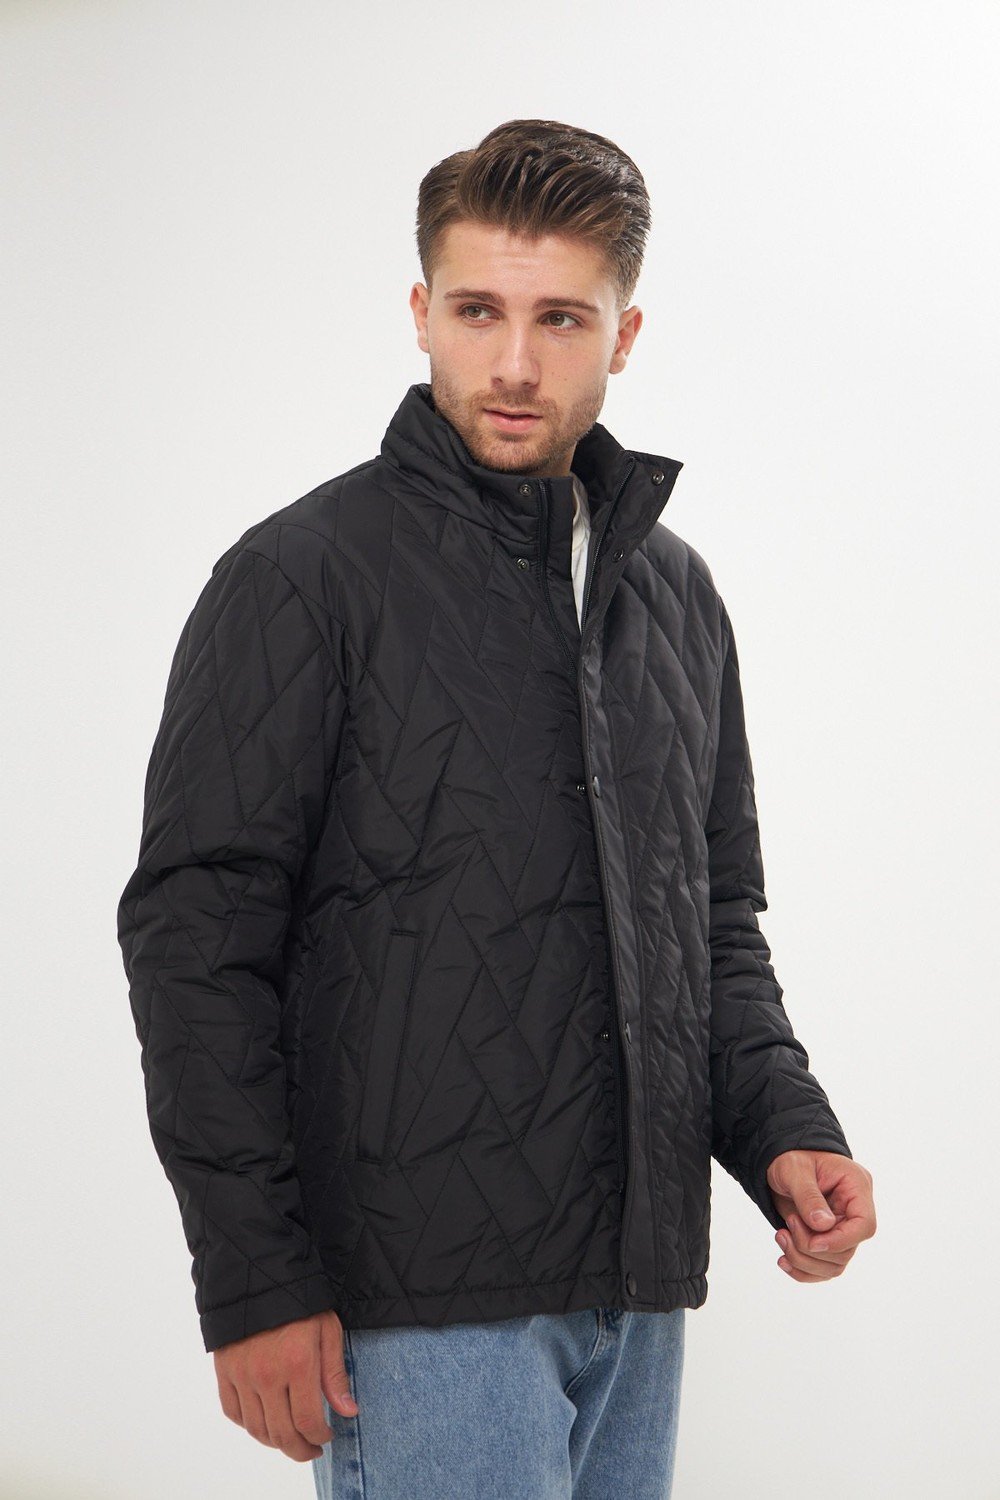 River Club Men's Black Waterproof And Windproof Stand Up Collar Quilted Patterned Coat.